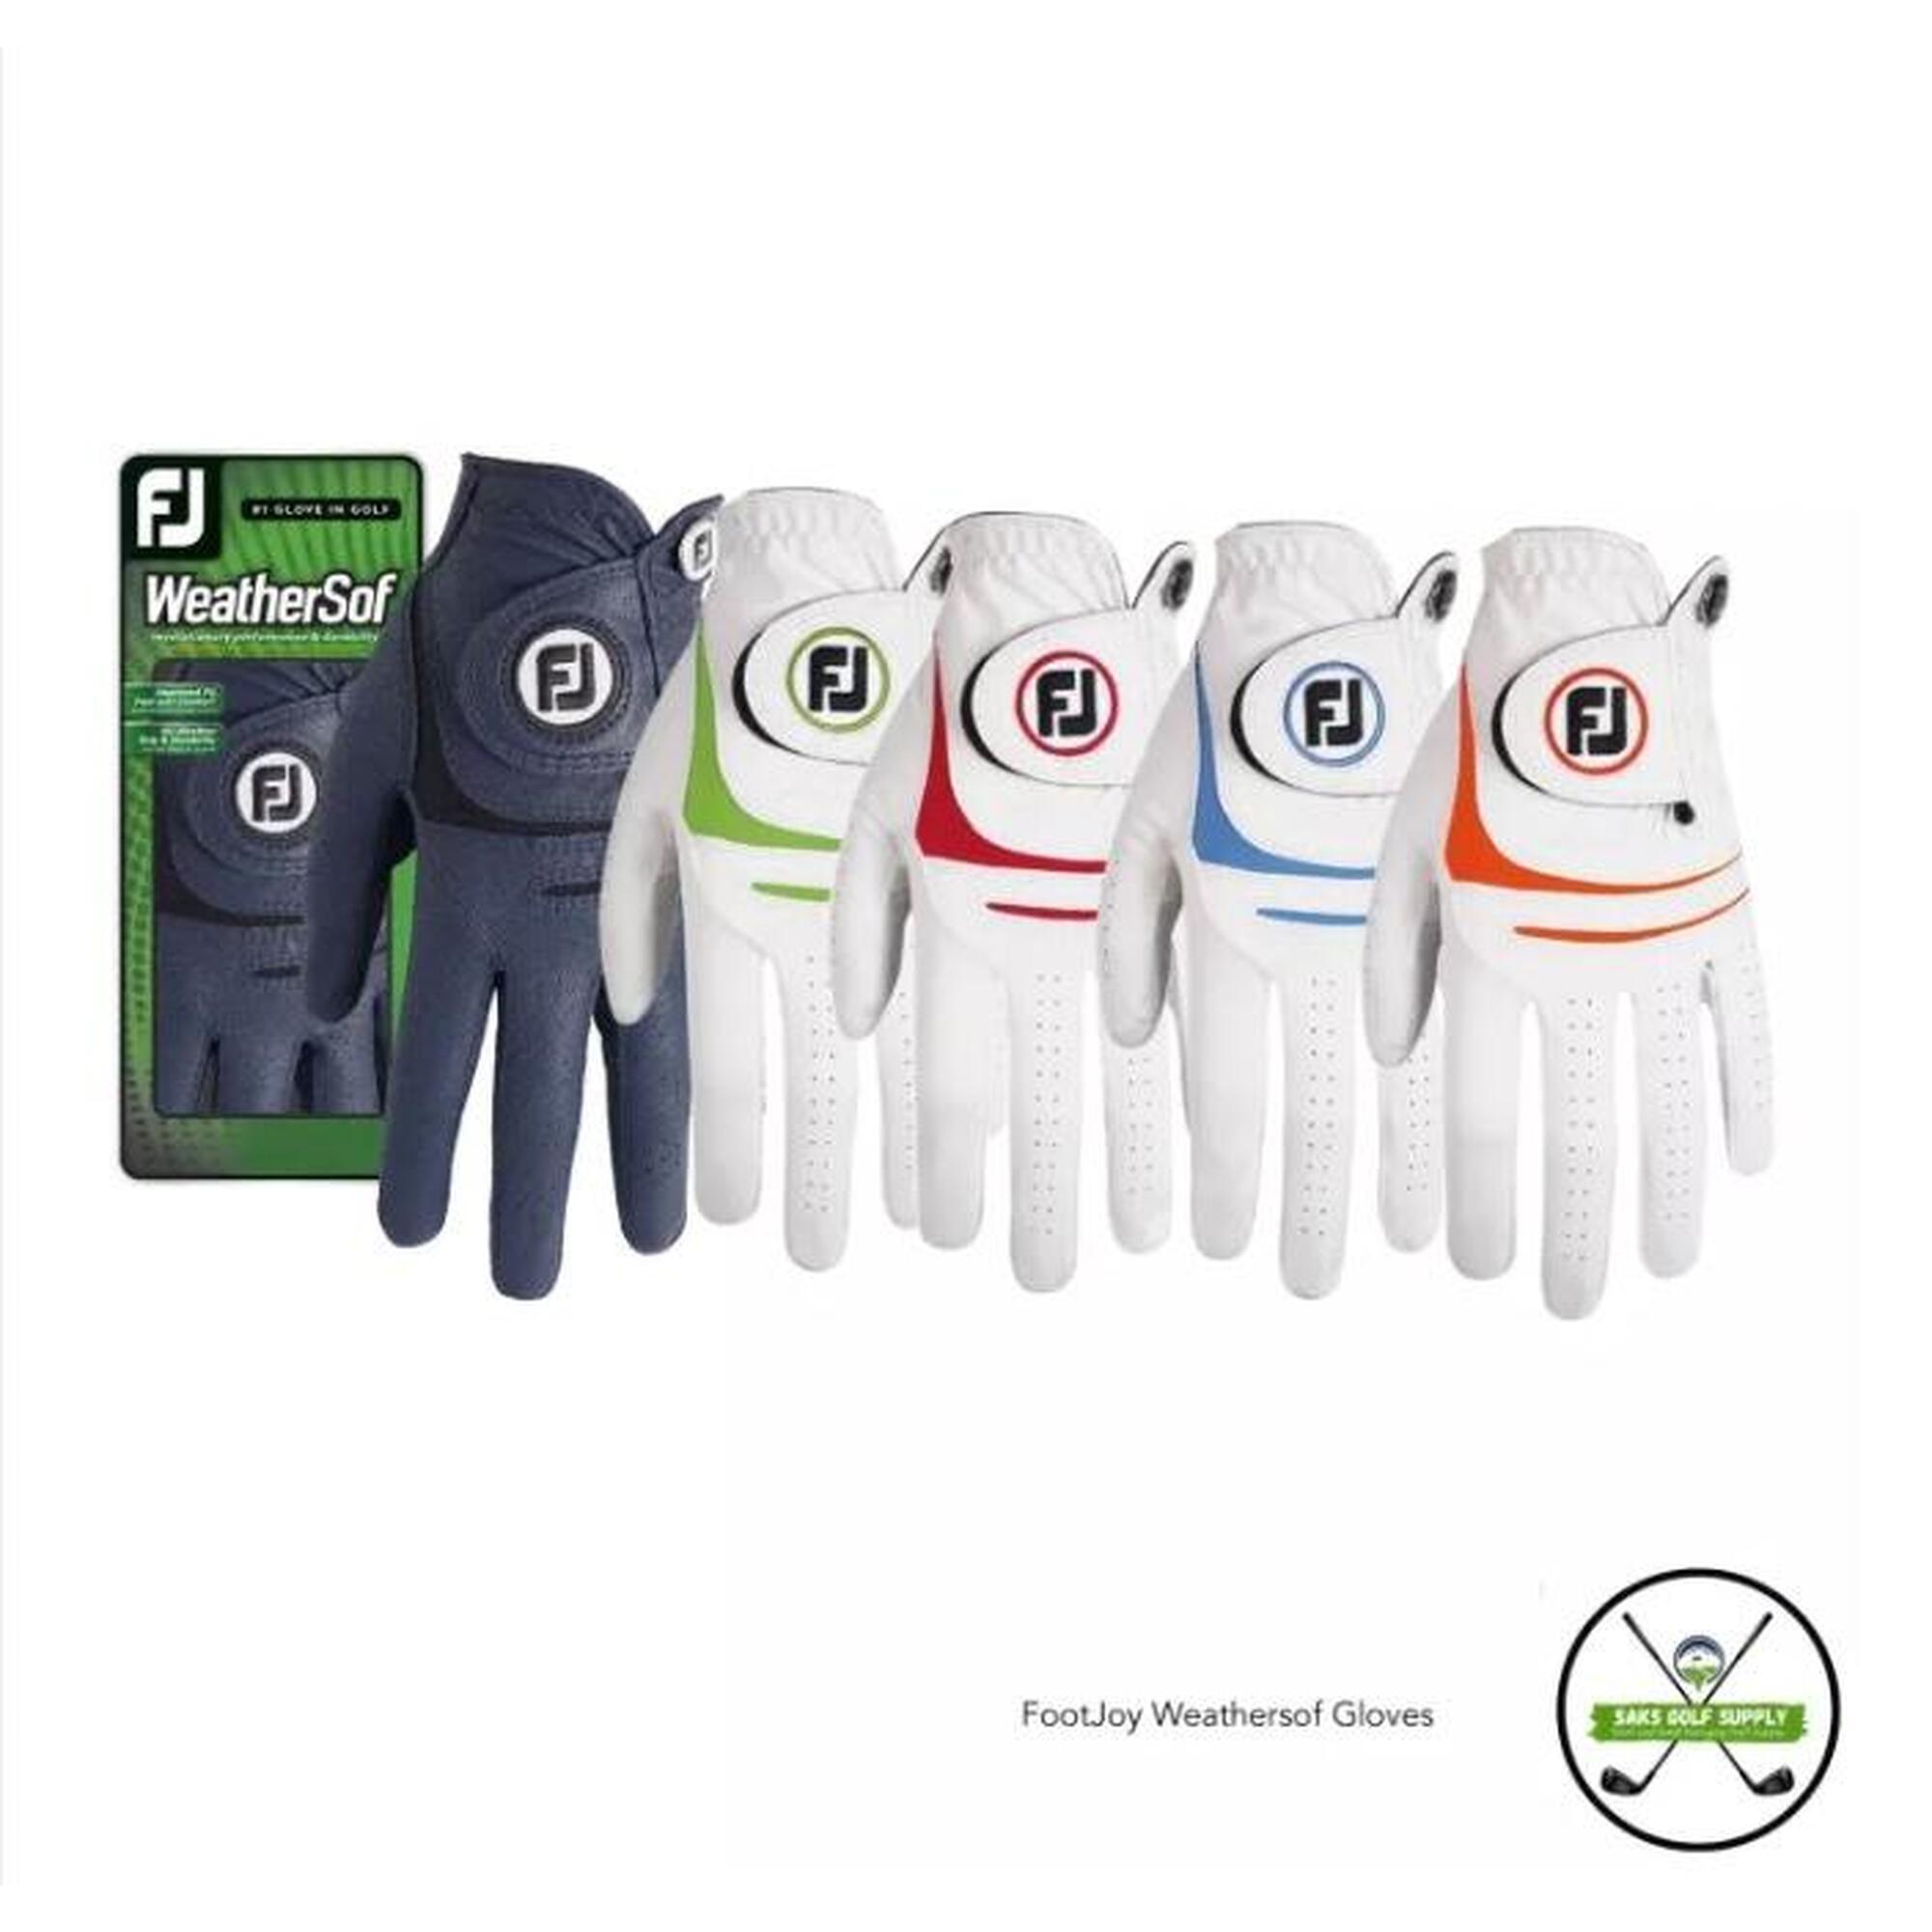 MEN'S WEATHERSOF LEATHER GOLF GLOVES (LEFT HAND)- WHITE/BLUE